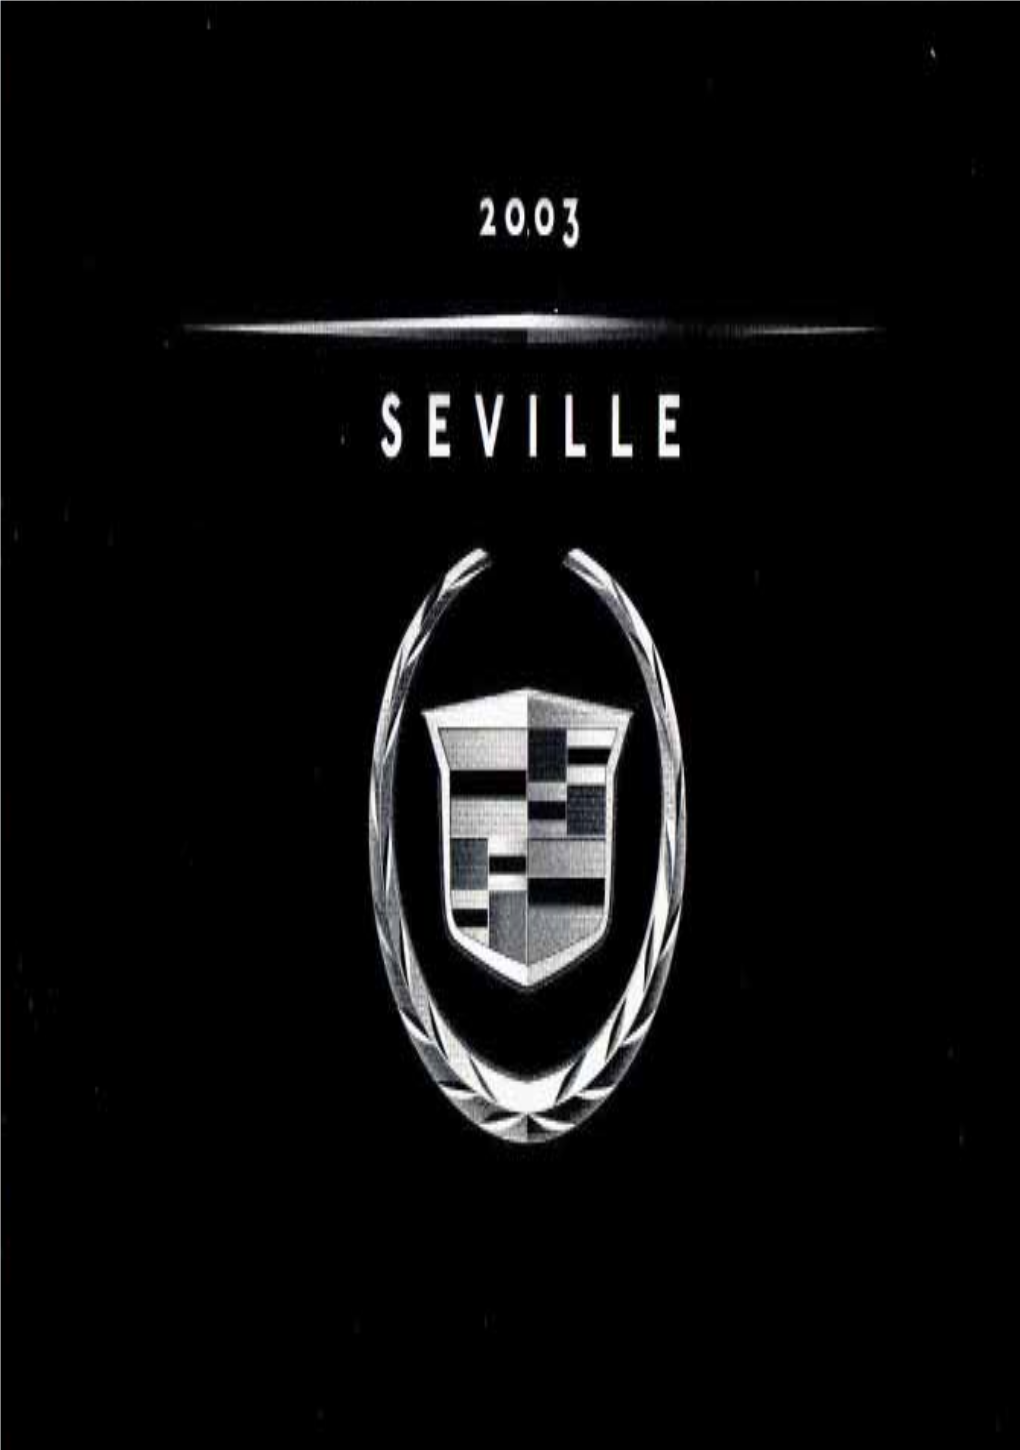 Owner's Manual,2003 Cadillac Seville